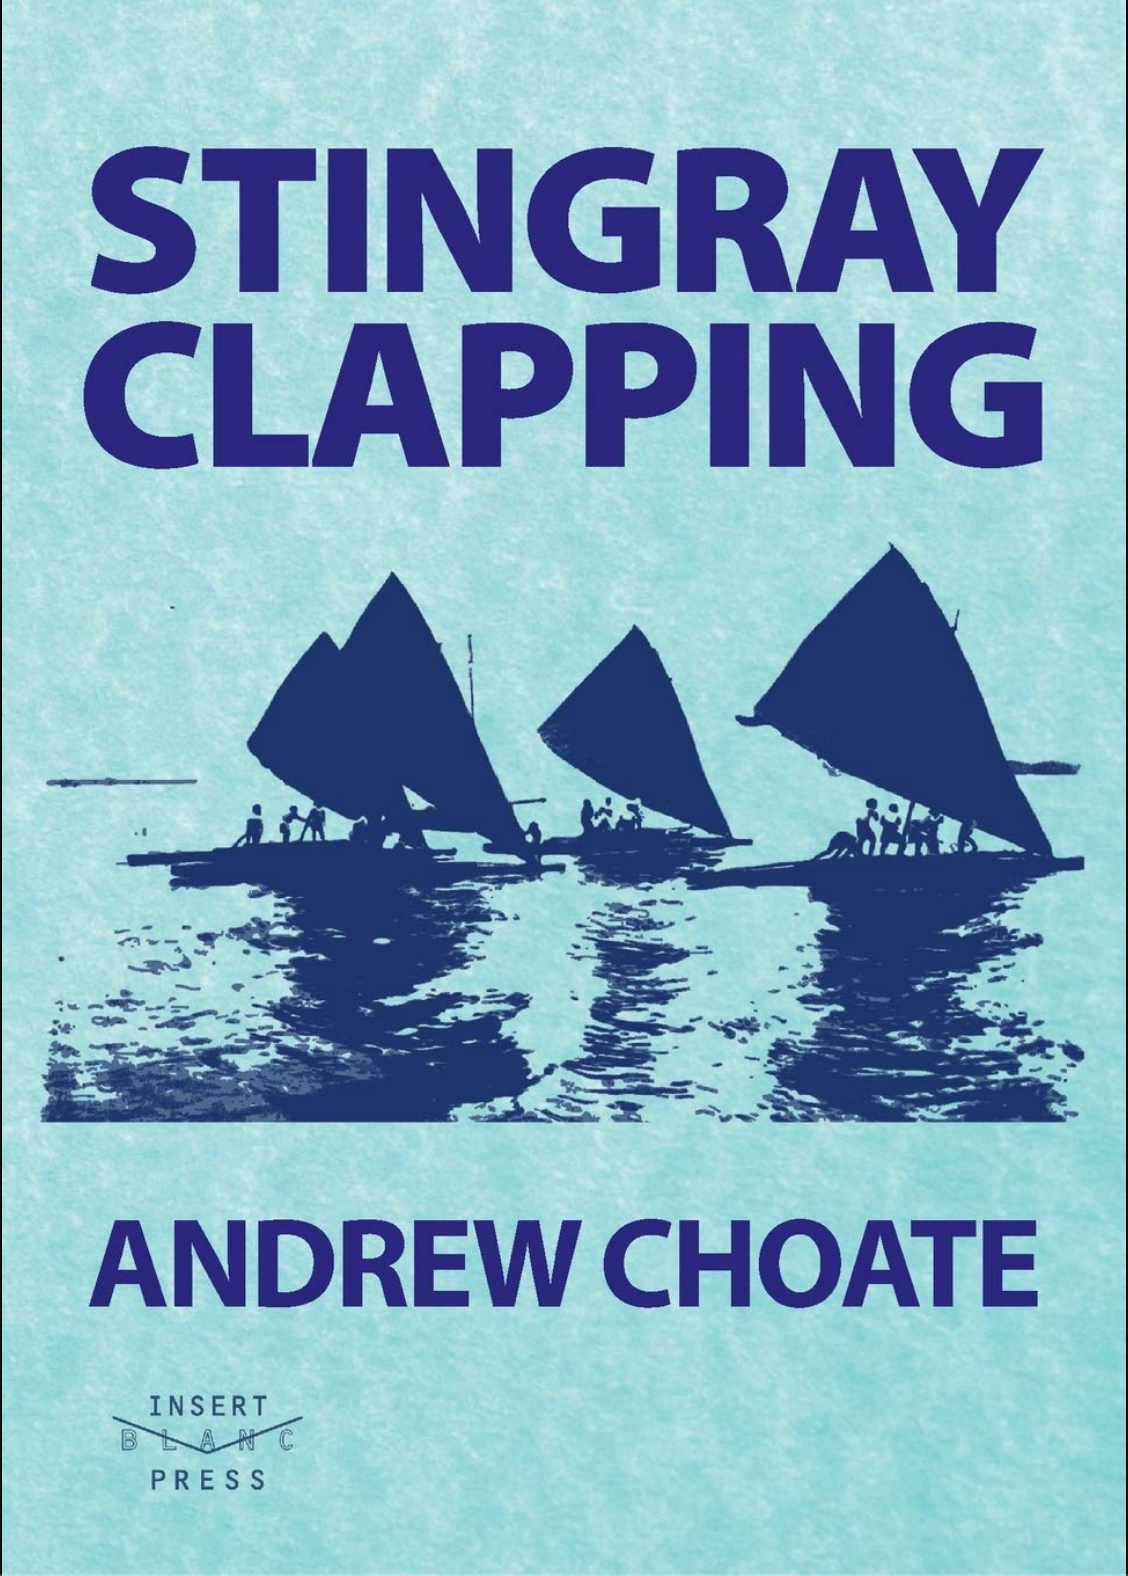 Stingray Clapping